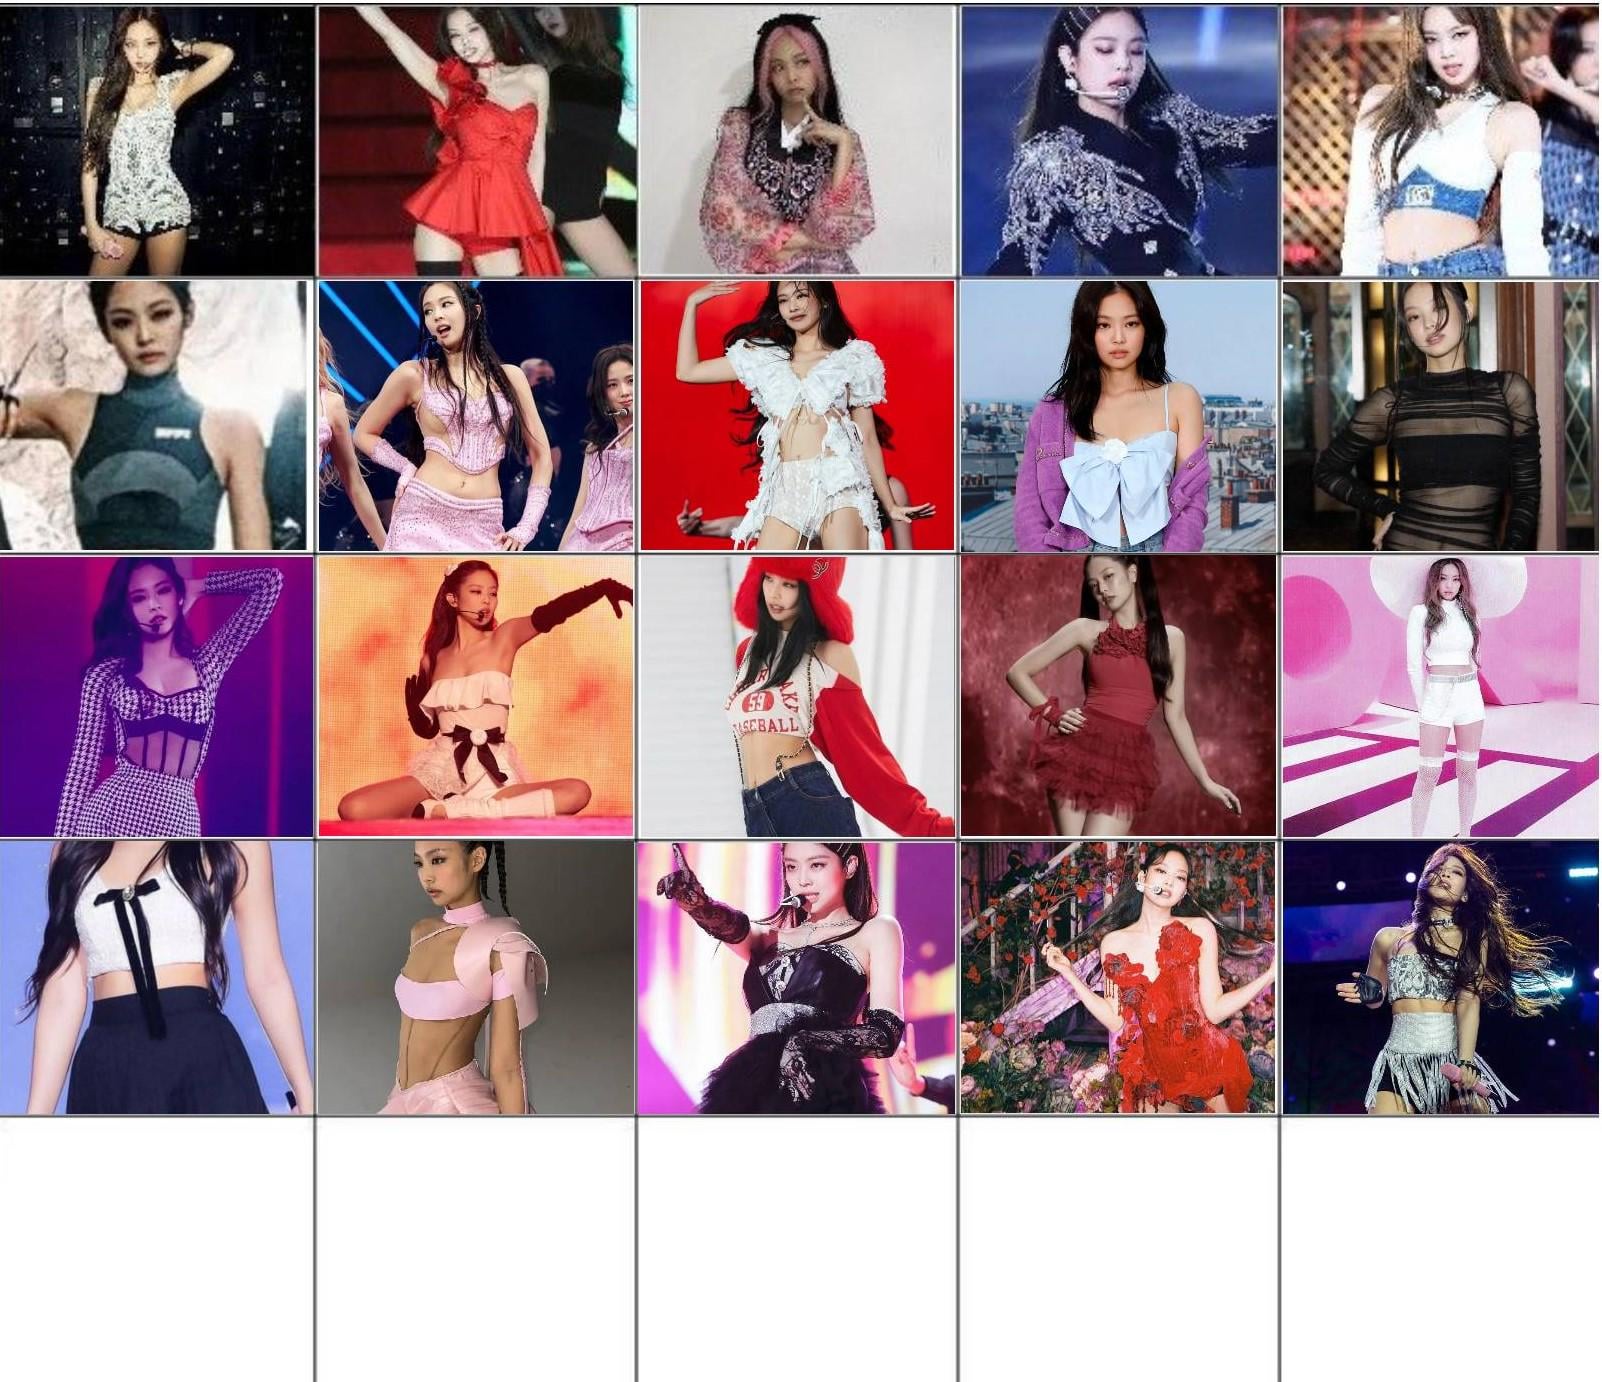 Top 25 Jennie outfit's of all time. 5 most upvoted comments will get a place.